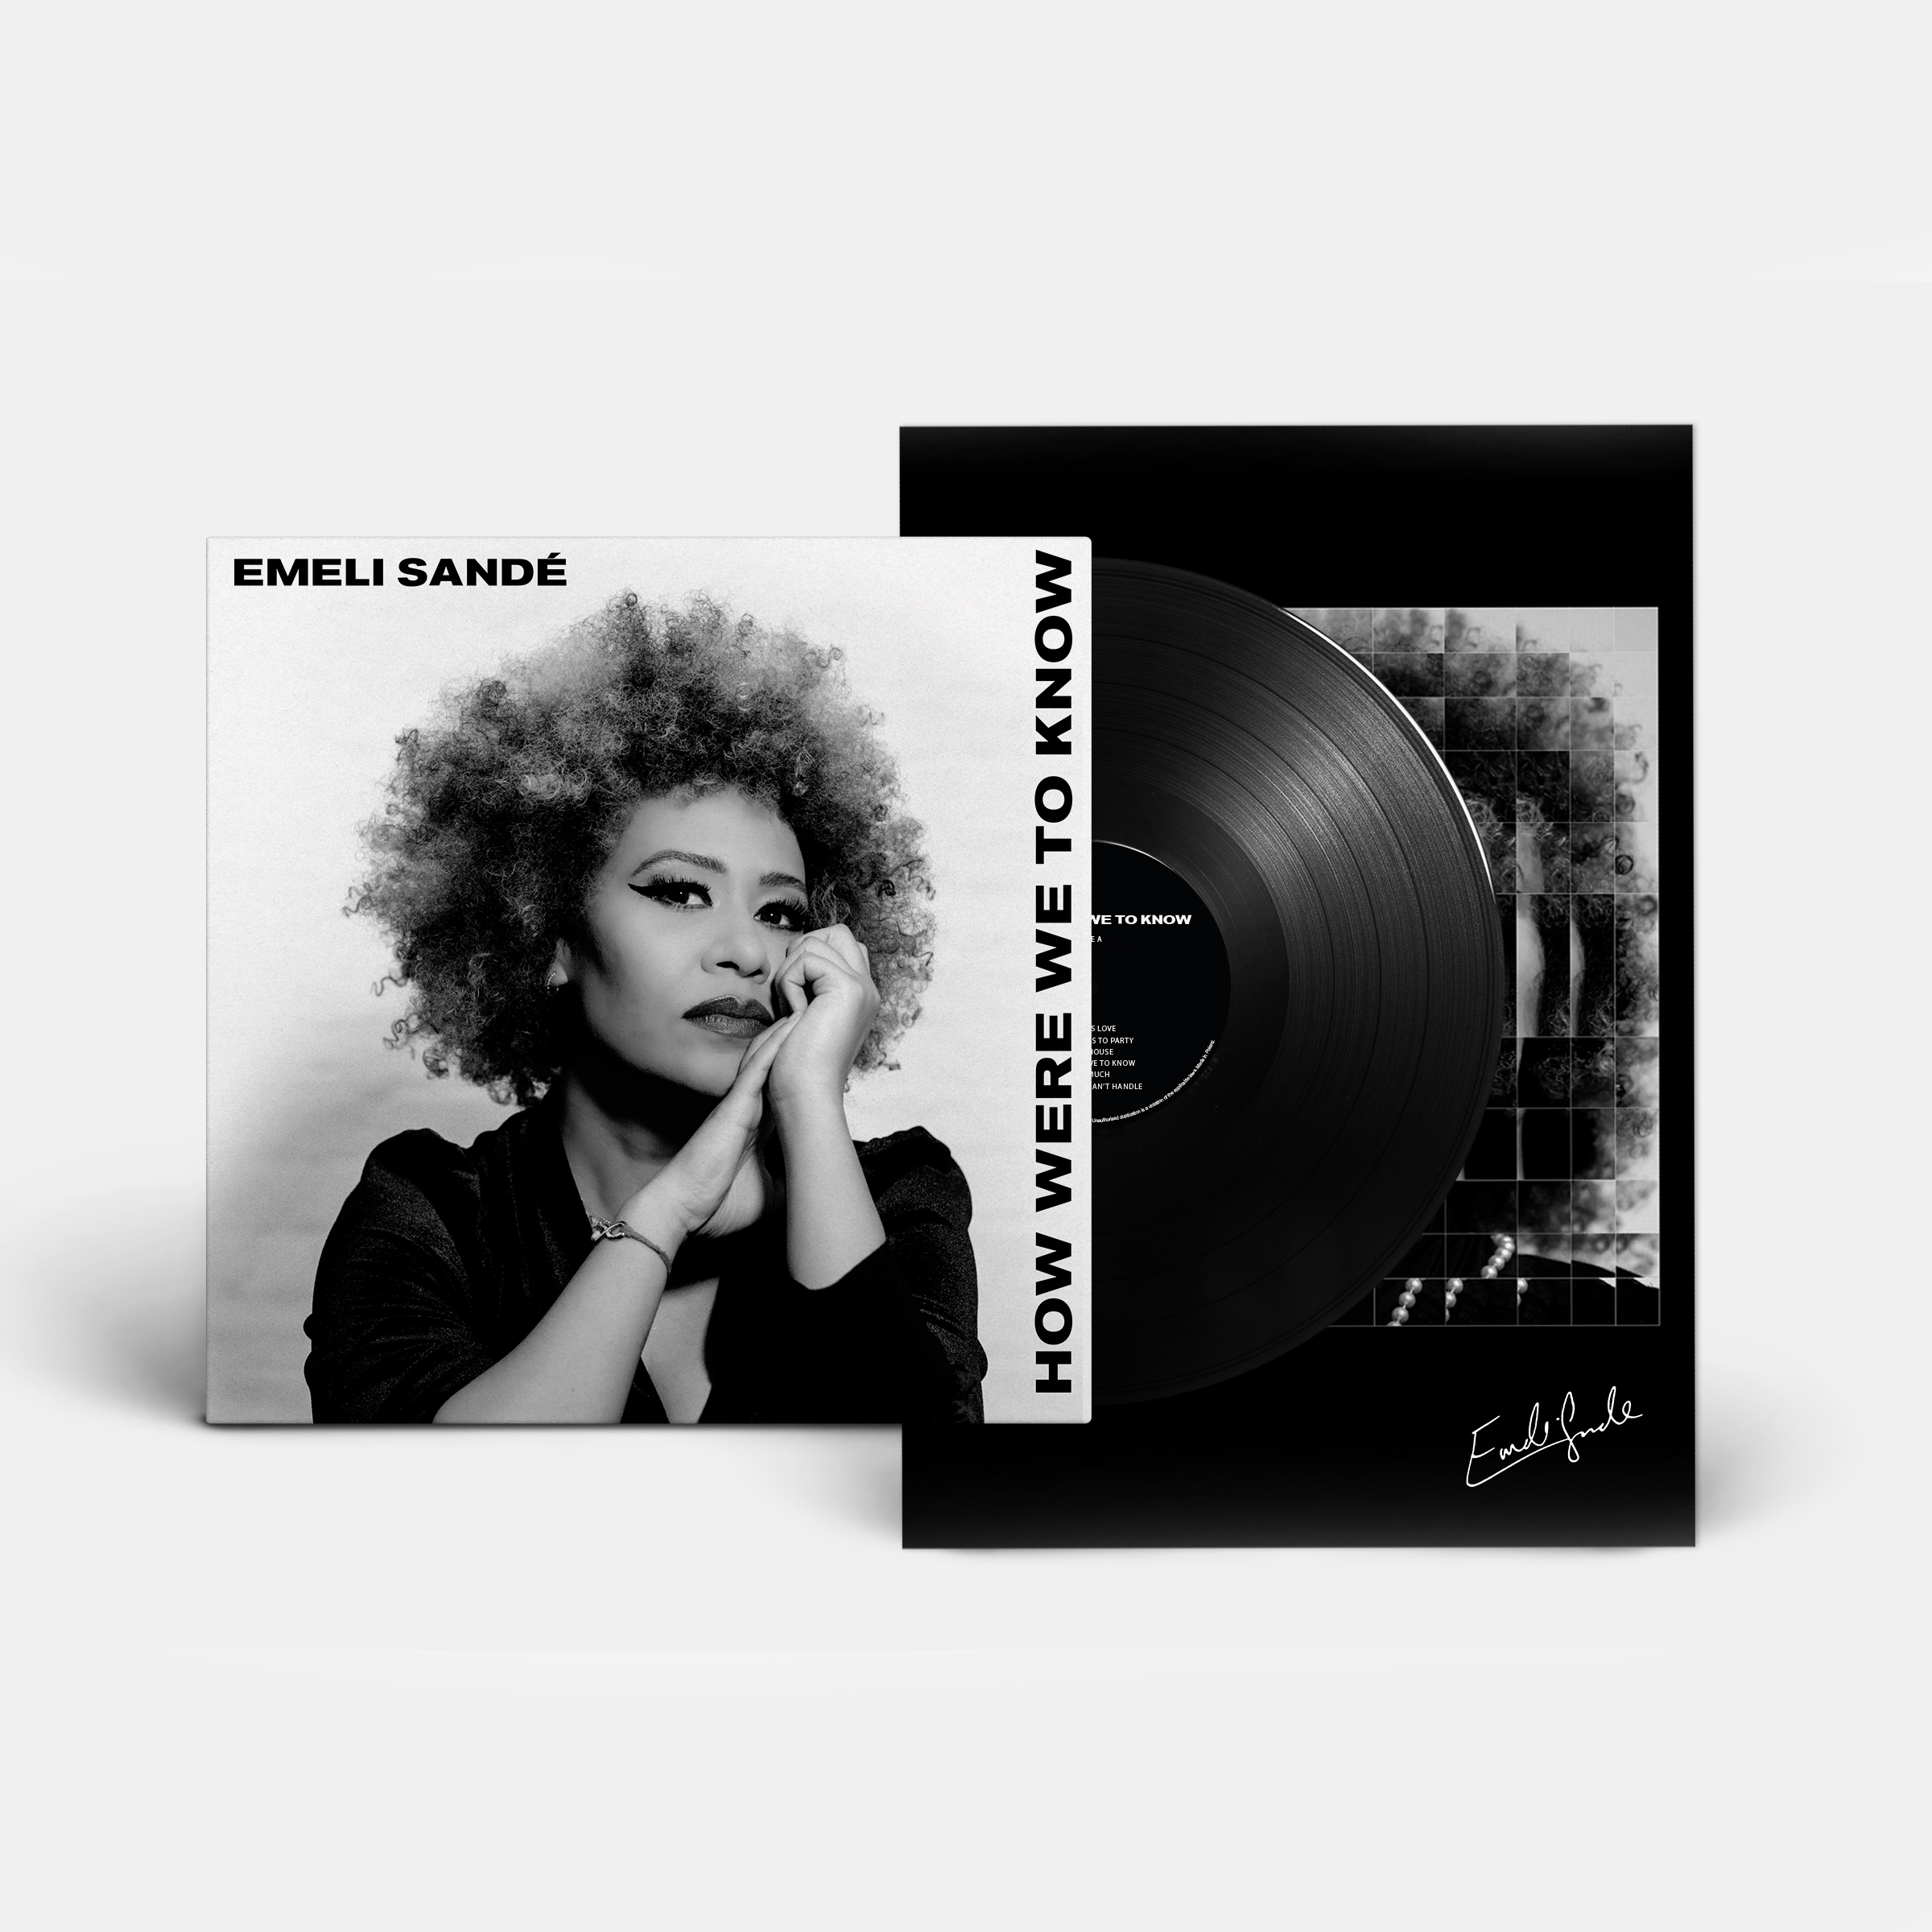 Emeli Sande - How Were We To Know: Limited Edition Vinyl LP + Signed Poster